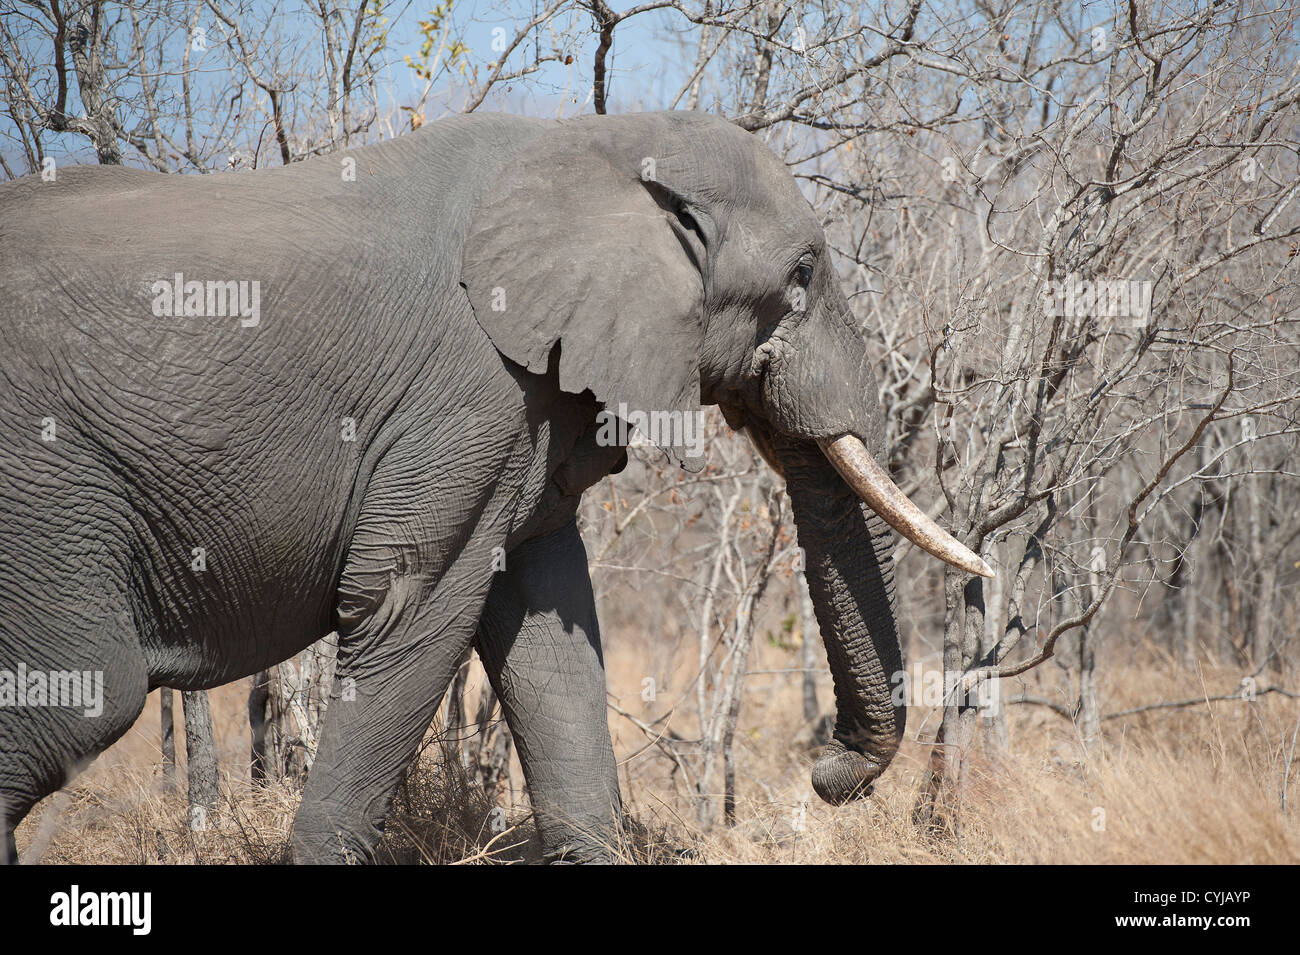 Elephant with tusks in the Kruger National Park, South Africa Stock Photo